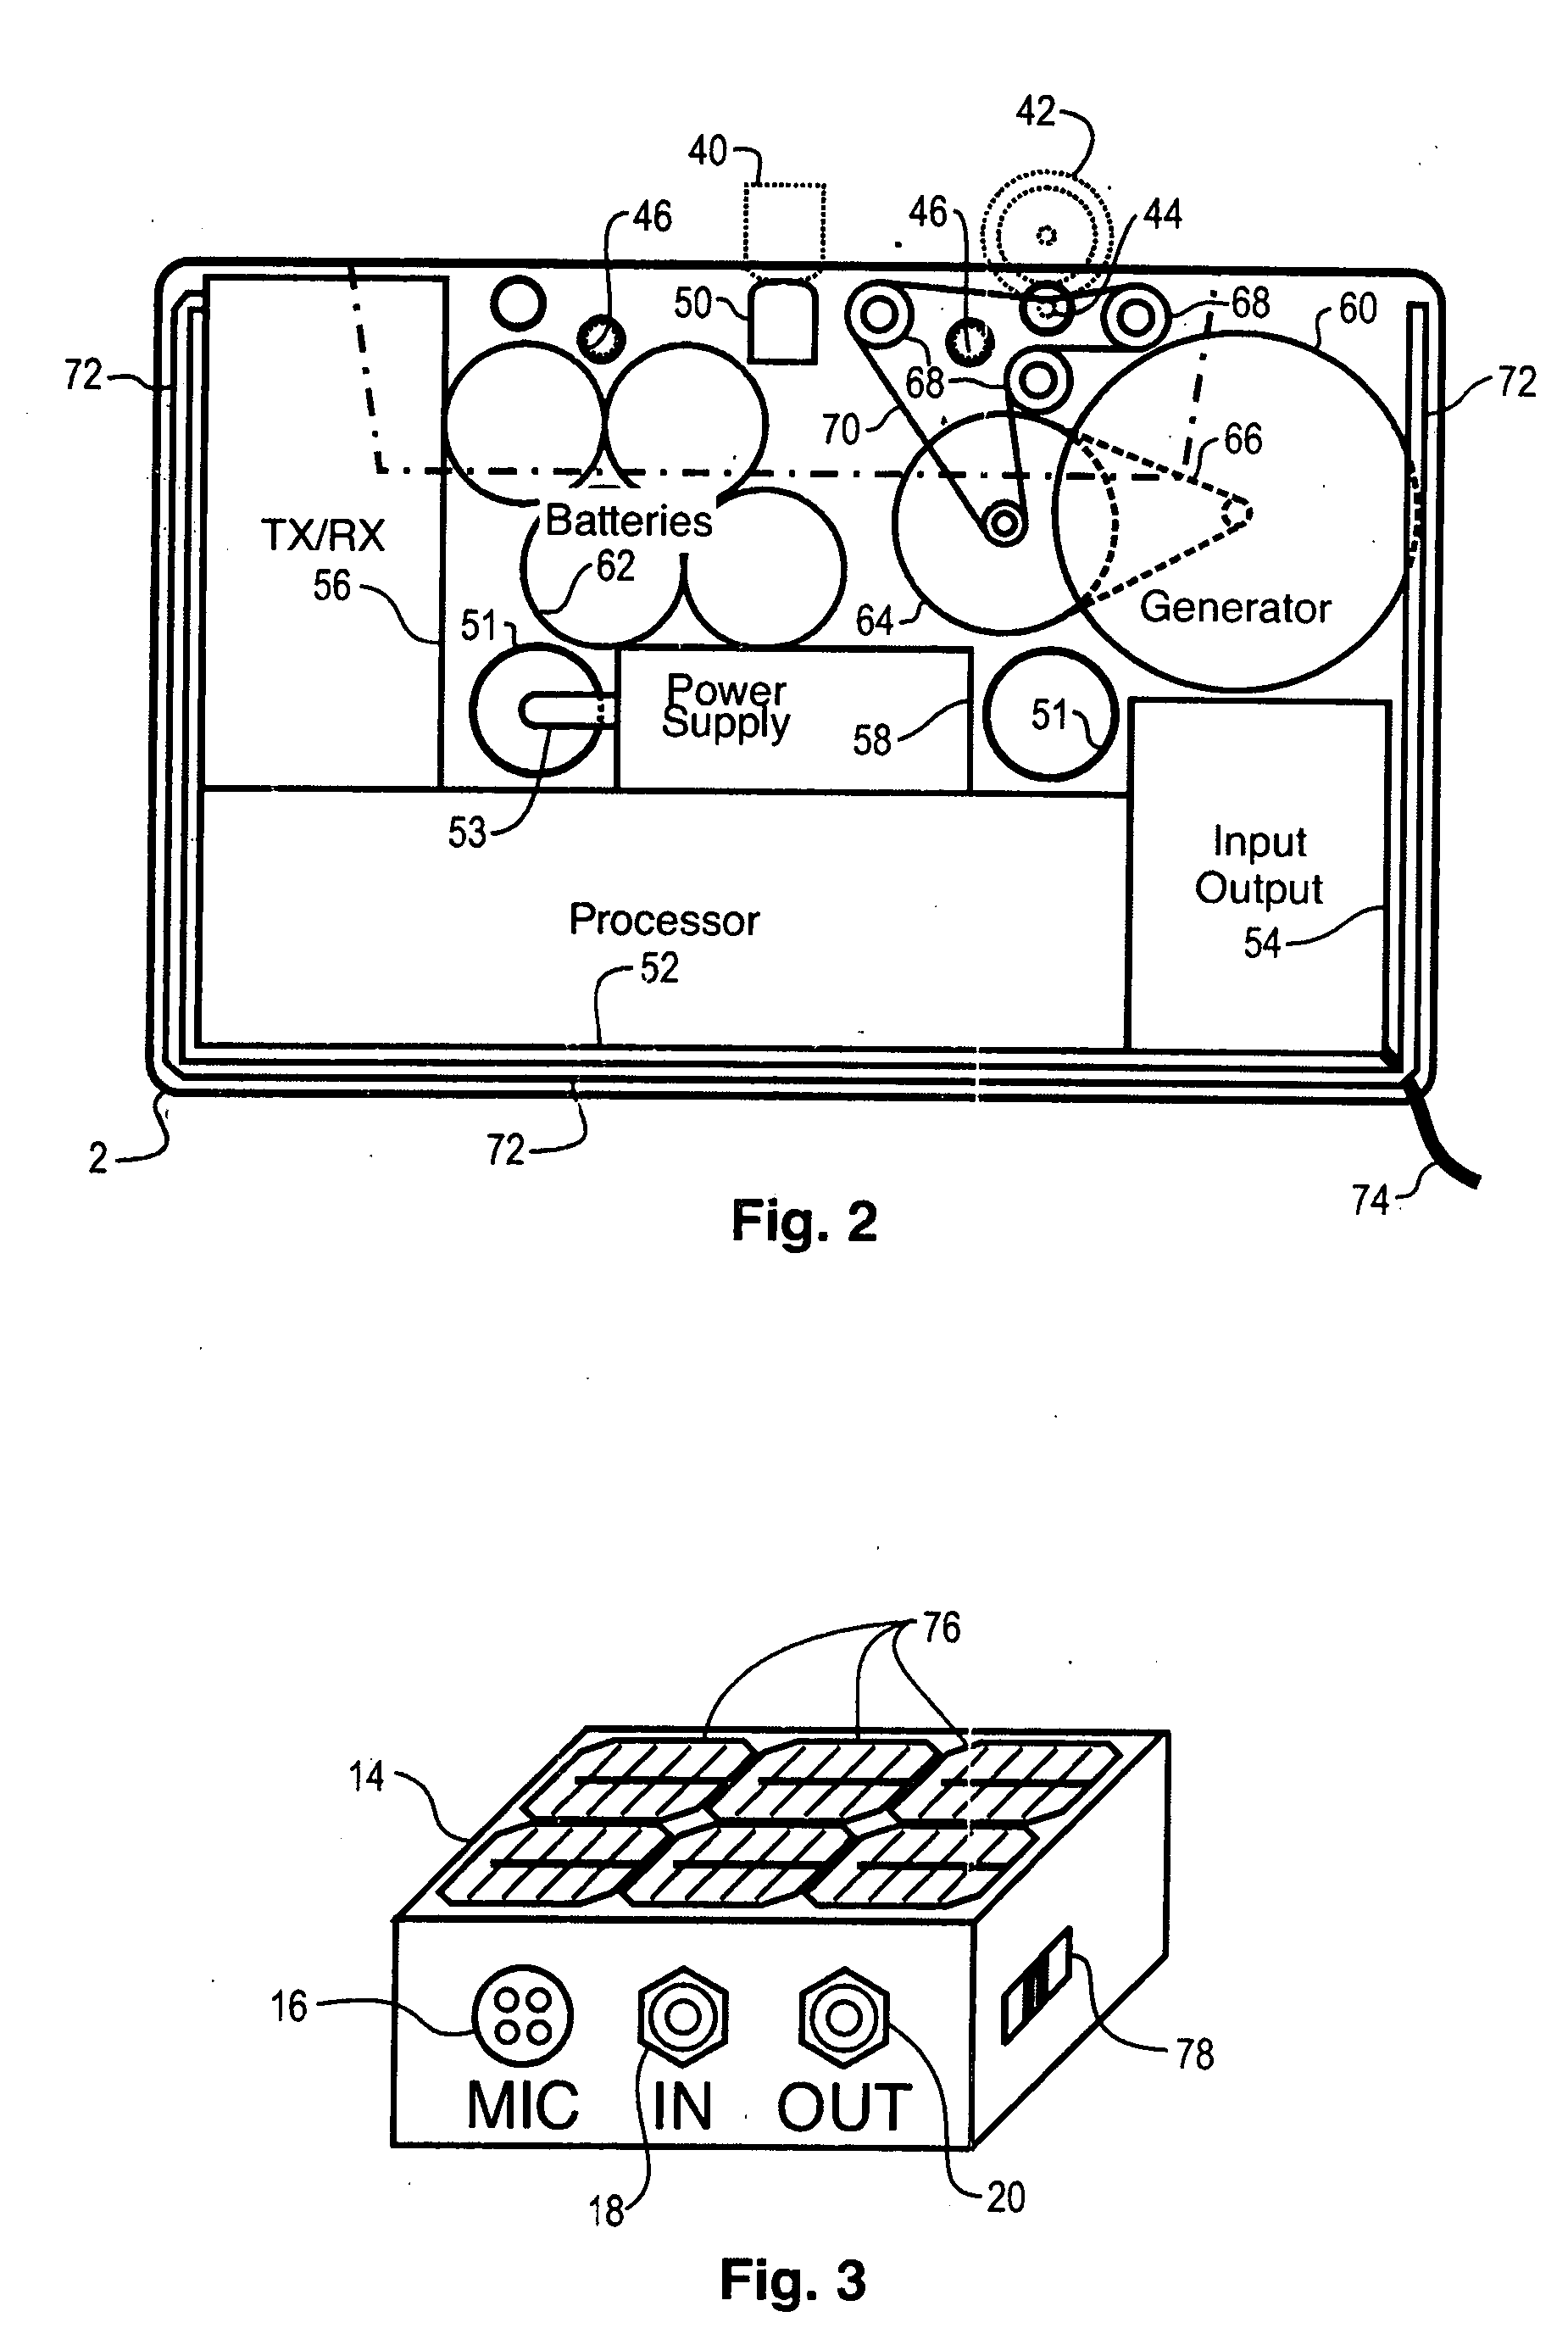 Network interface cassette adapter and method